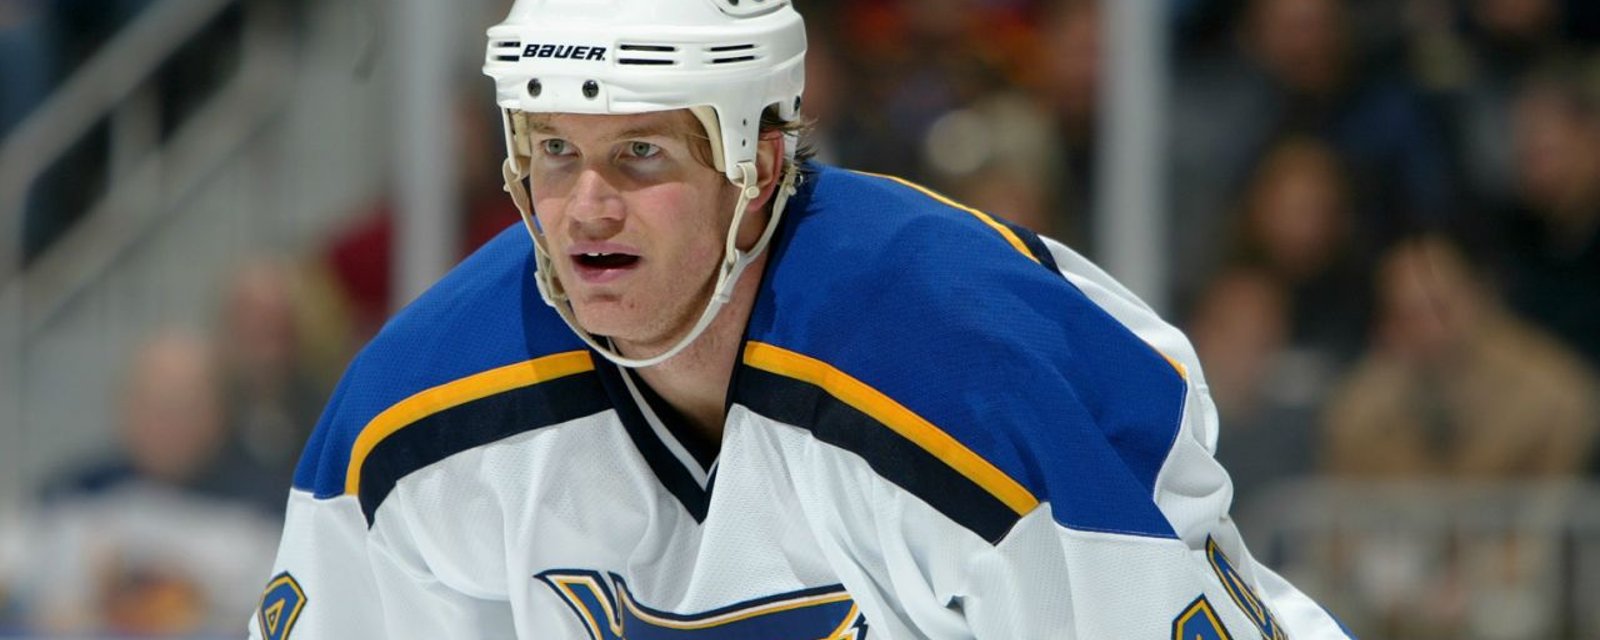 Blues announce they will retire Chris Pronger's number.